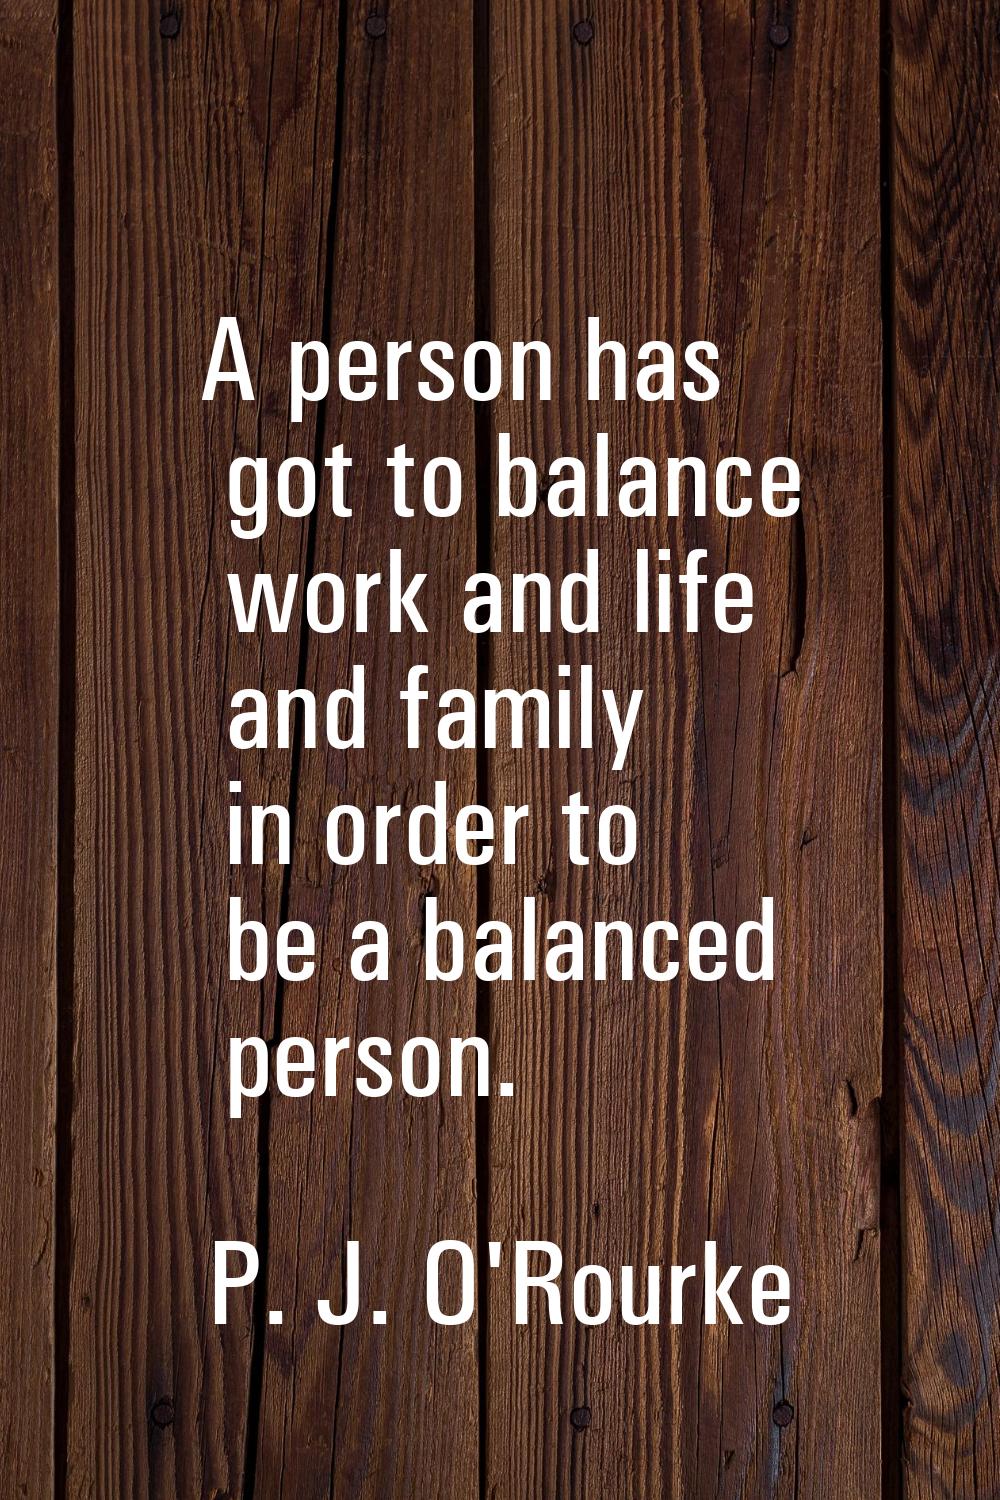 A person has got to balance work and life and family in order to be a balanced person.